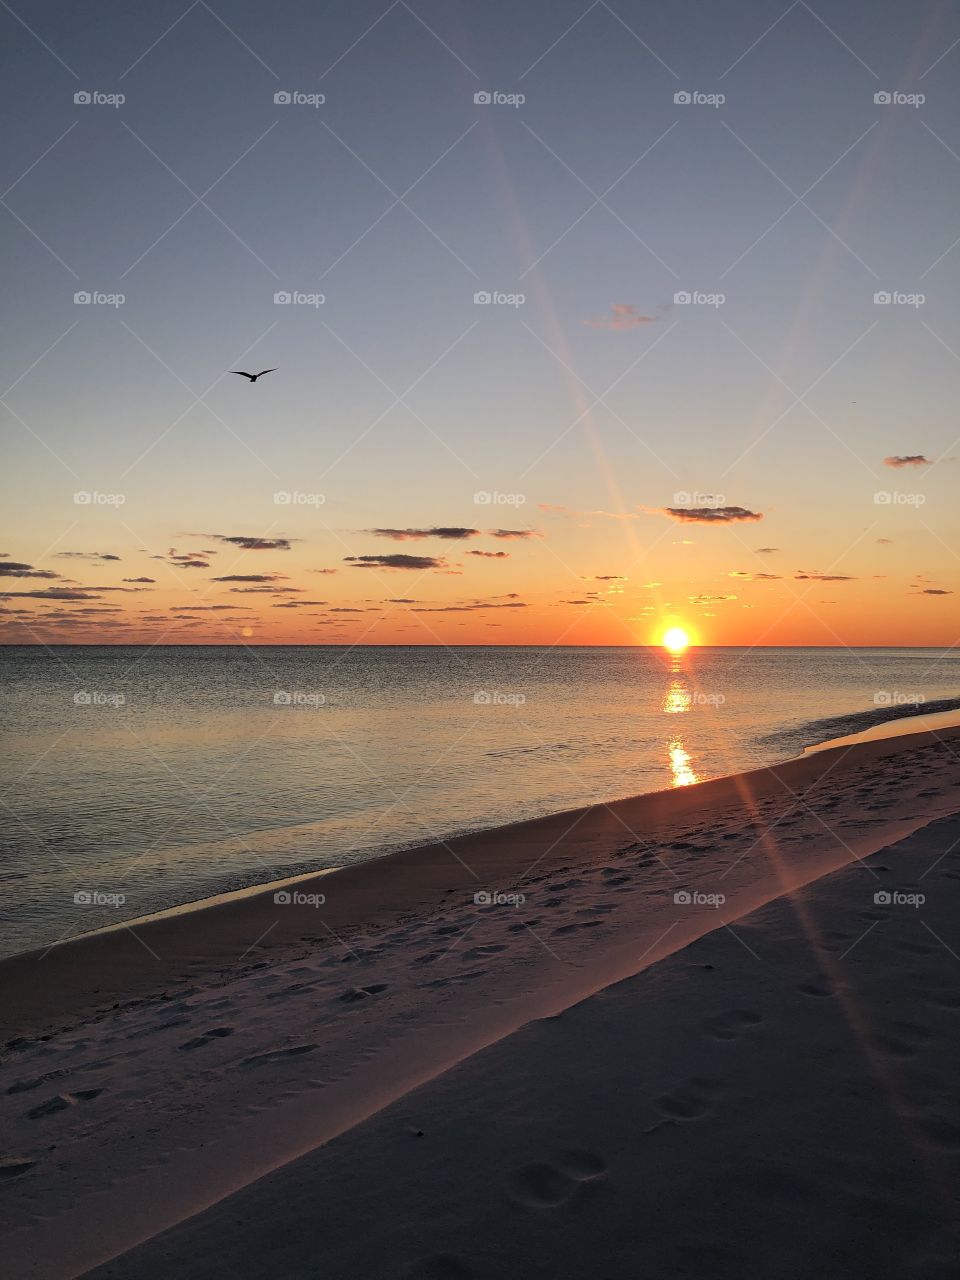 30A Beach Florida Winter Sunset with Seagull